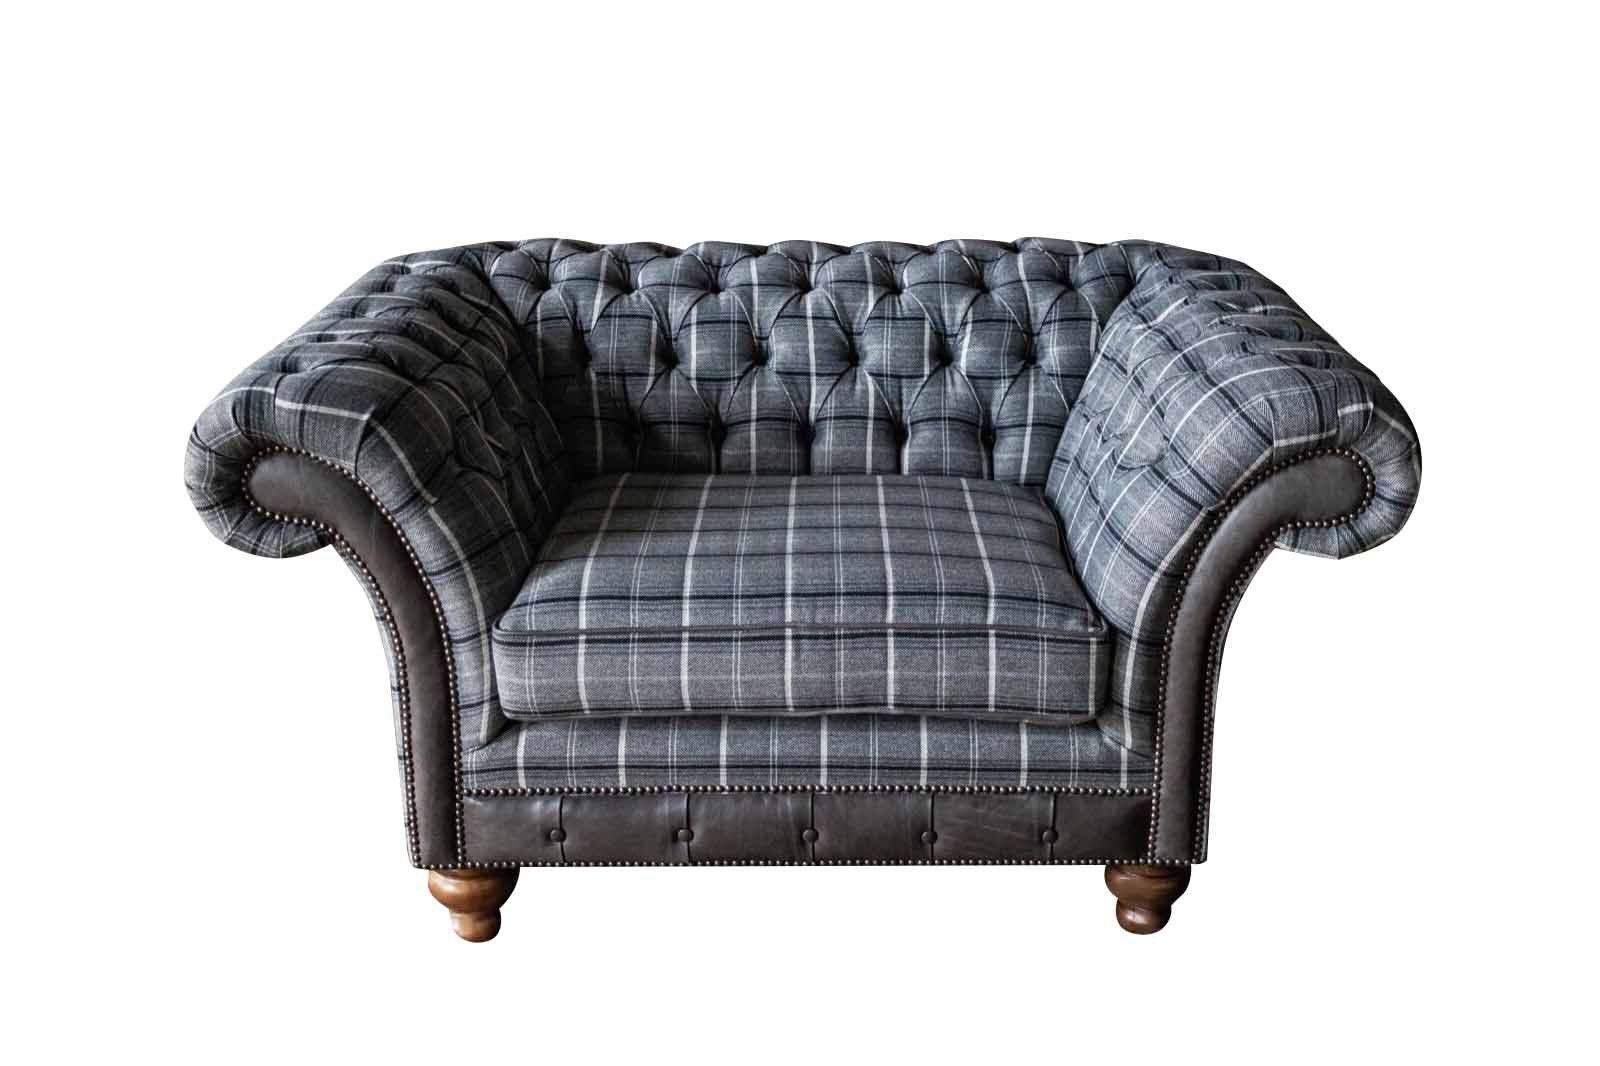 Sessel Sessel 1 Couchen Made Polster, Chesterfield Sofa Europe Couch Stoff JVmoebel Sitzer Textil In